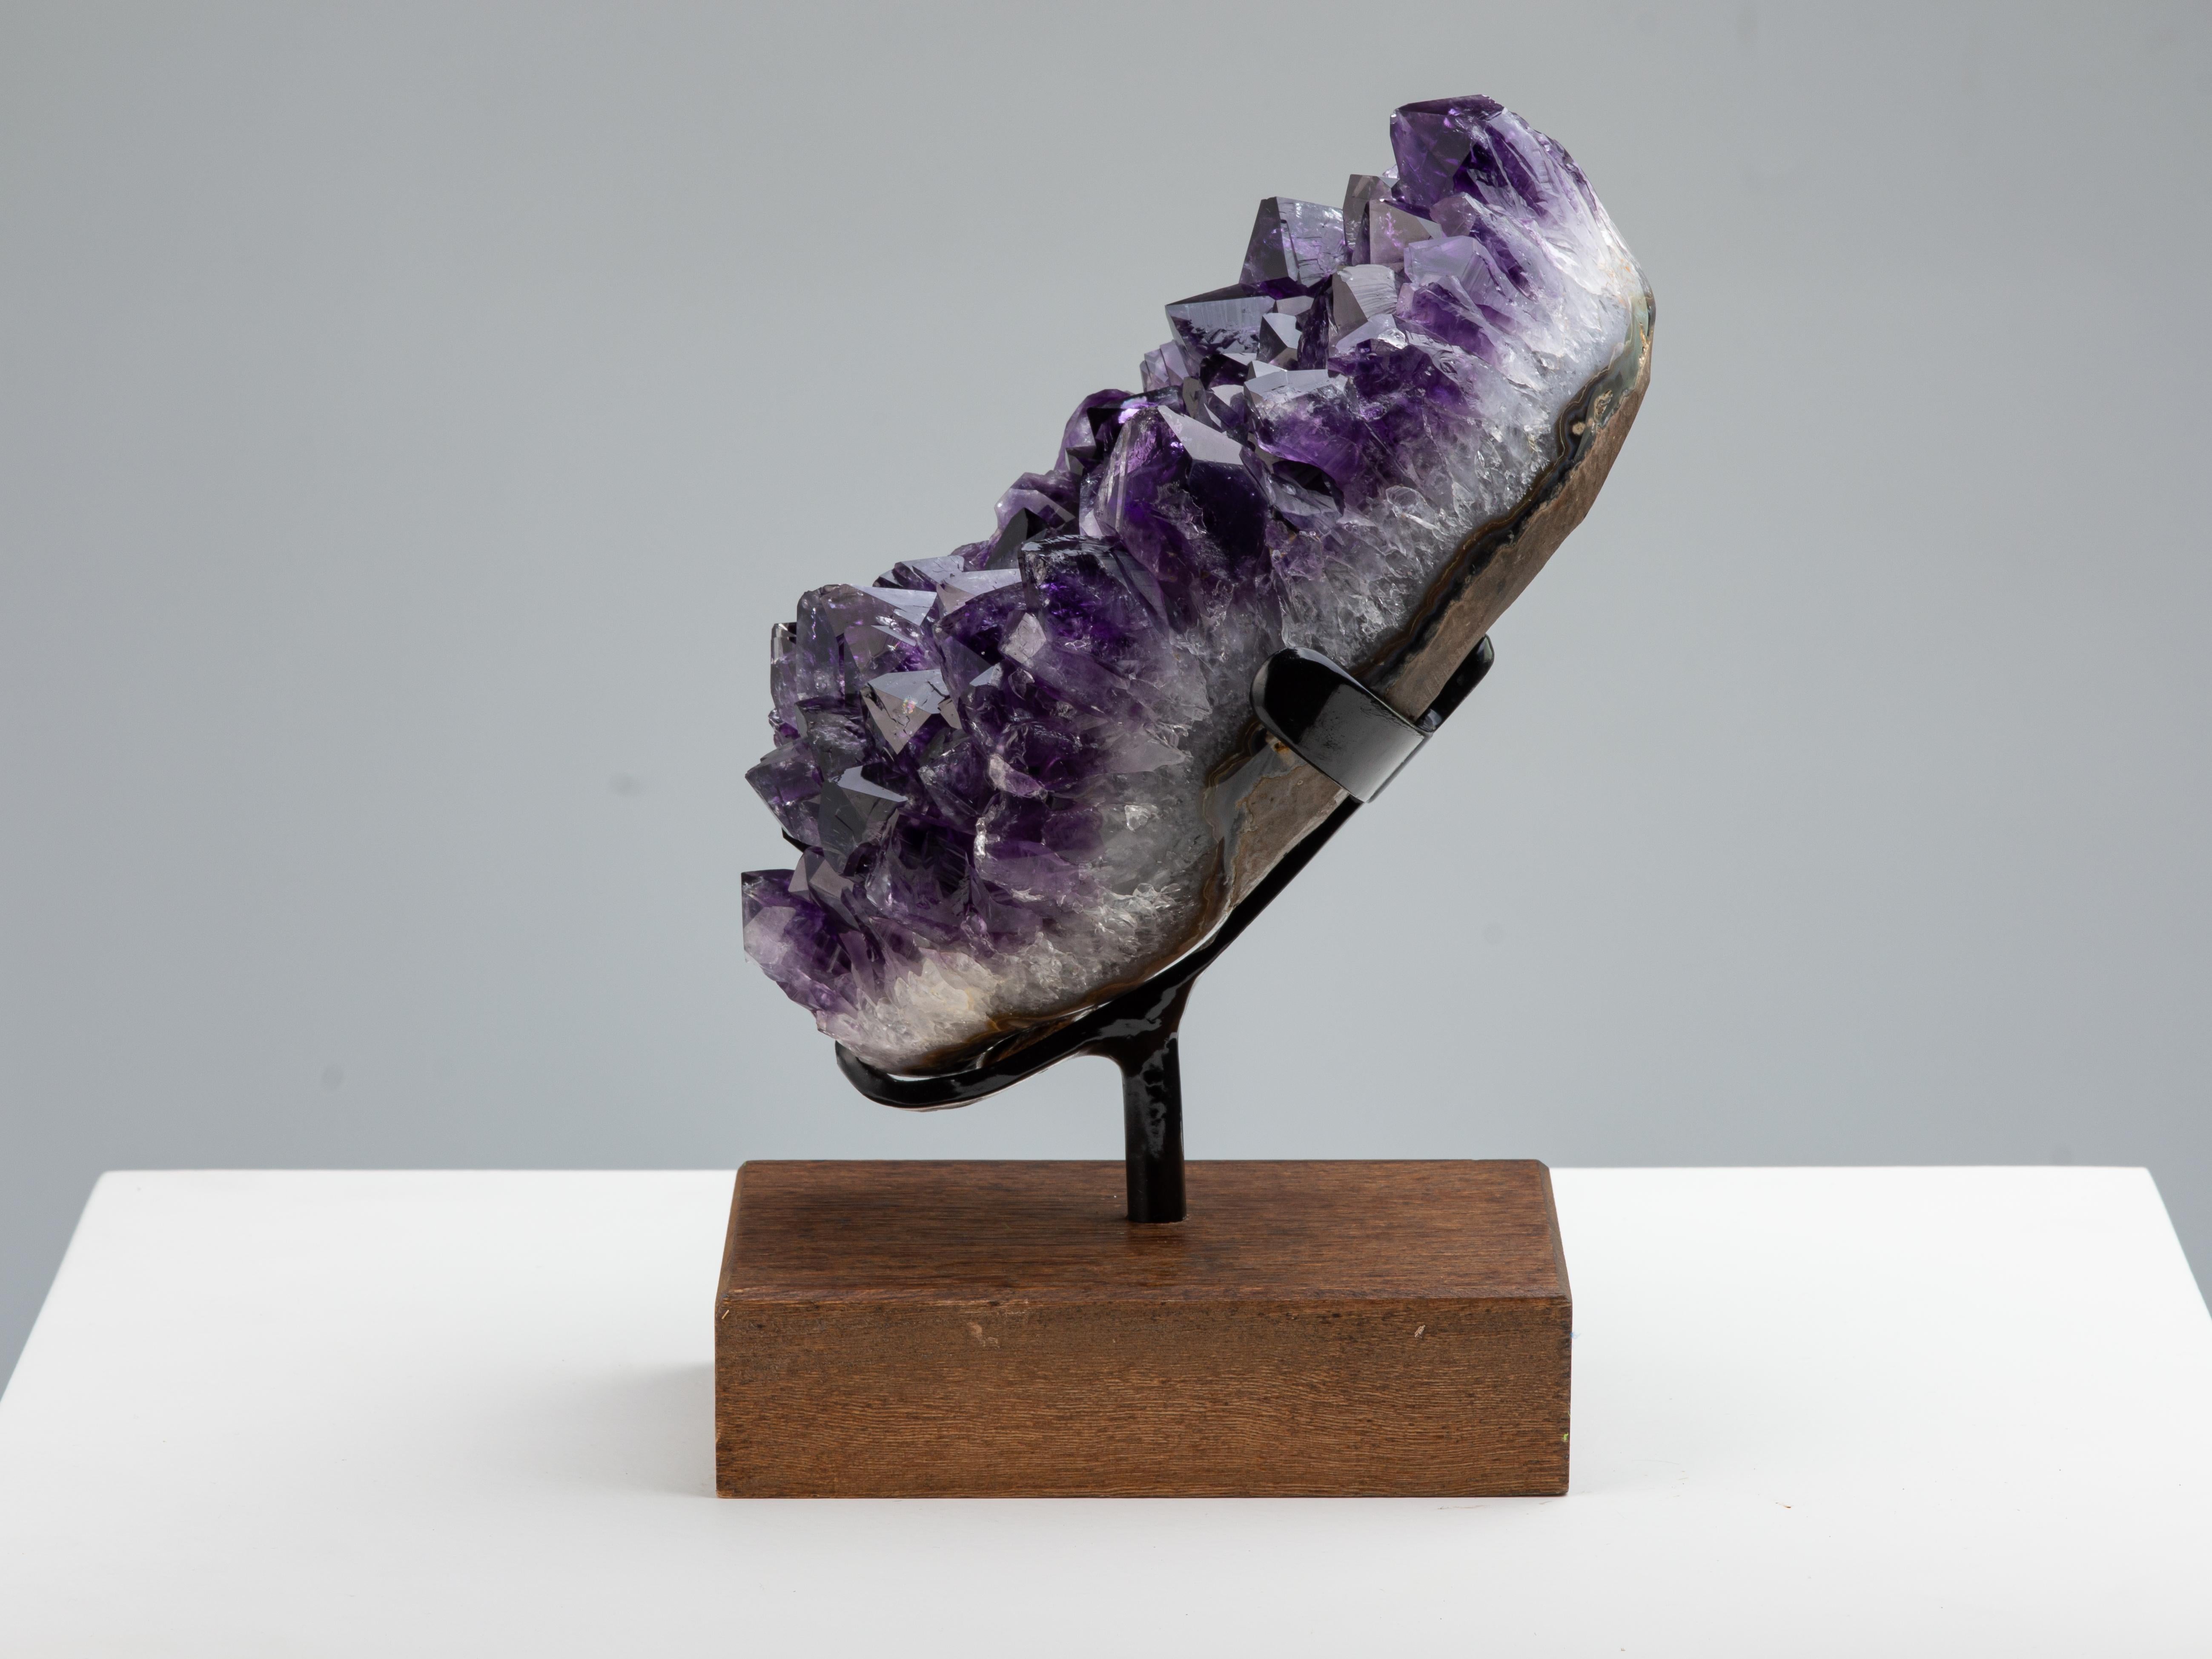 A gorgeous deep purple amethyst cluster with high peaked crystals. The polished frame shows mineral layers developing from the rough basalt, to the grey/blue agate, the thick layer of white quartz and finally to the amethyst crystal. 

The back of